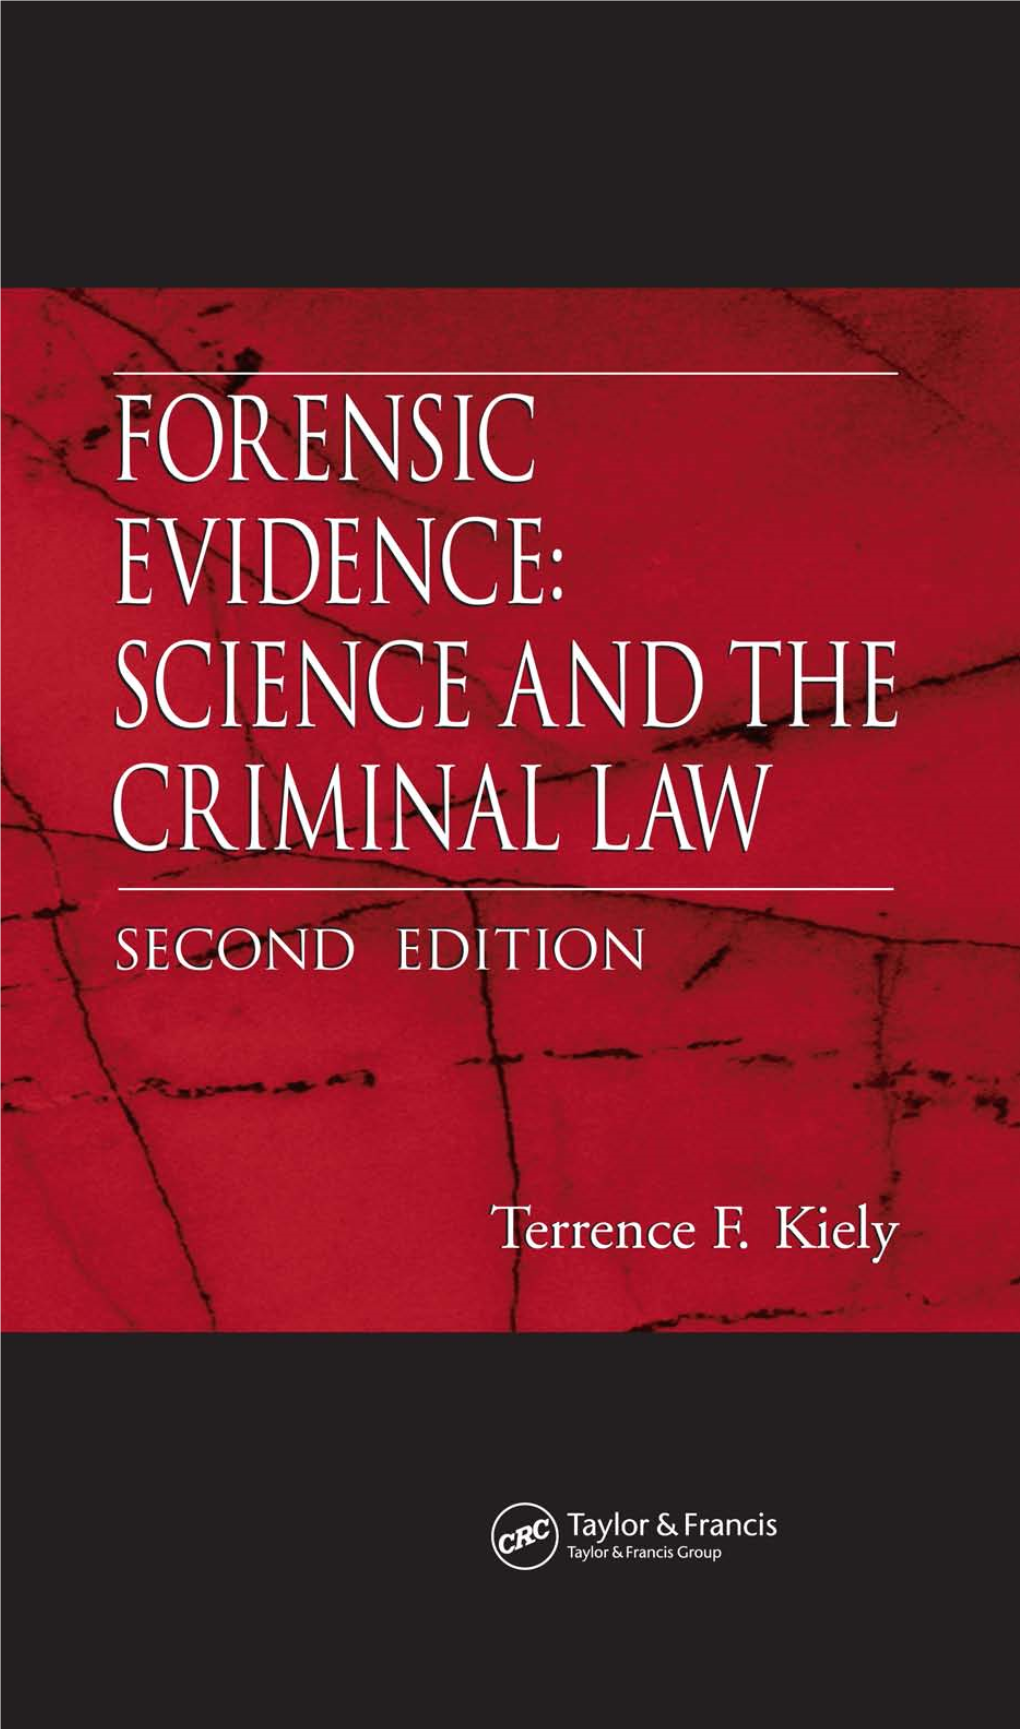 Science and the Criminal Law Second Edition